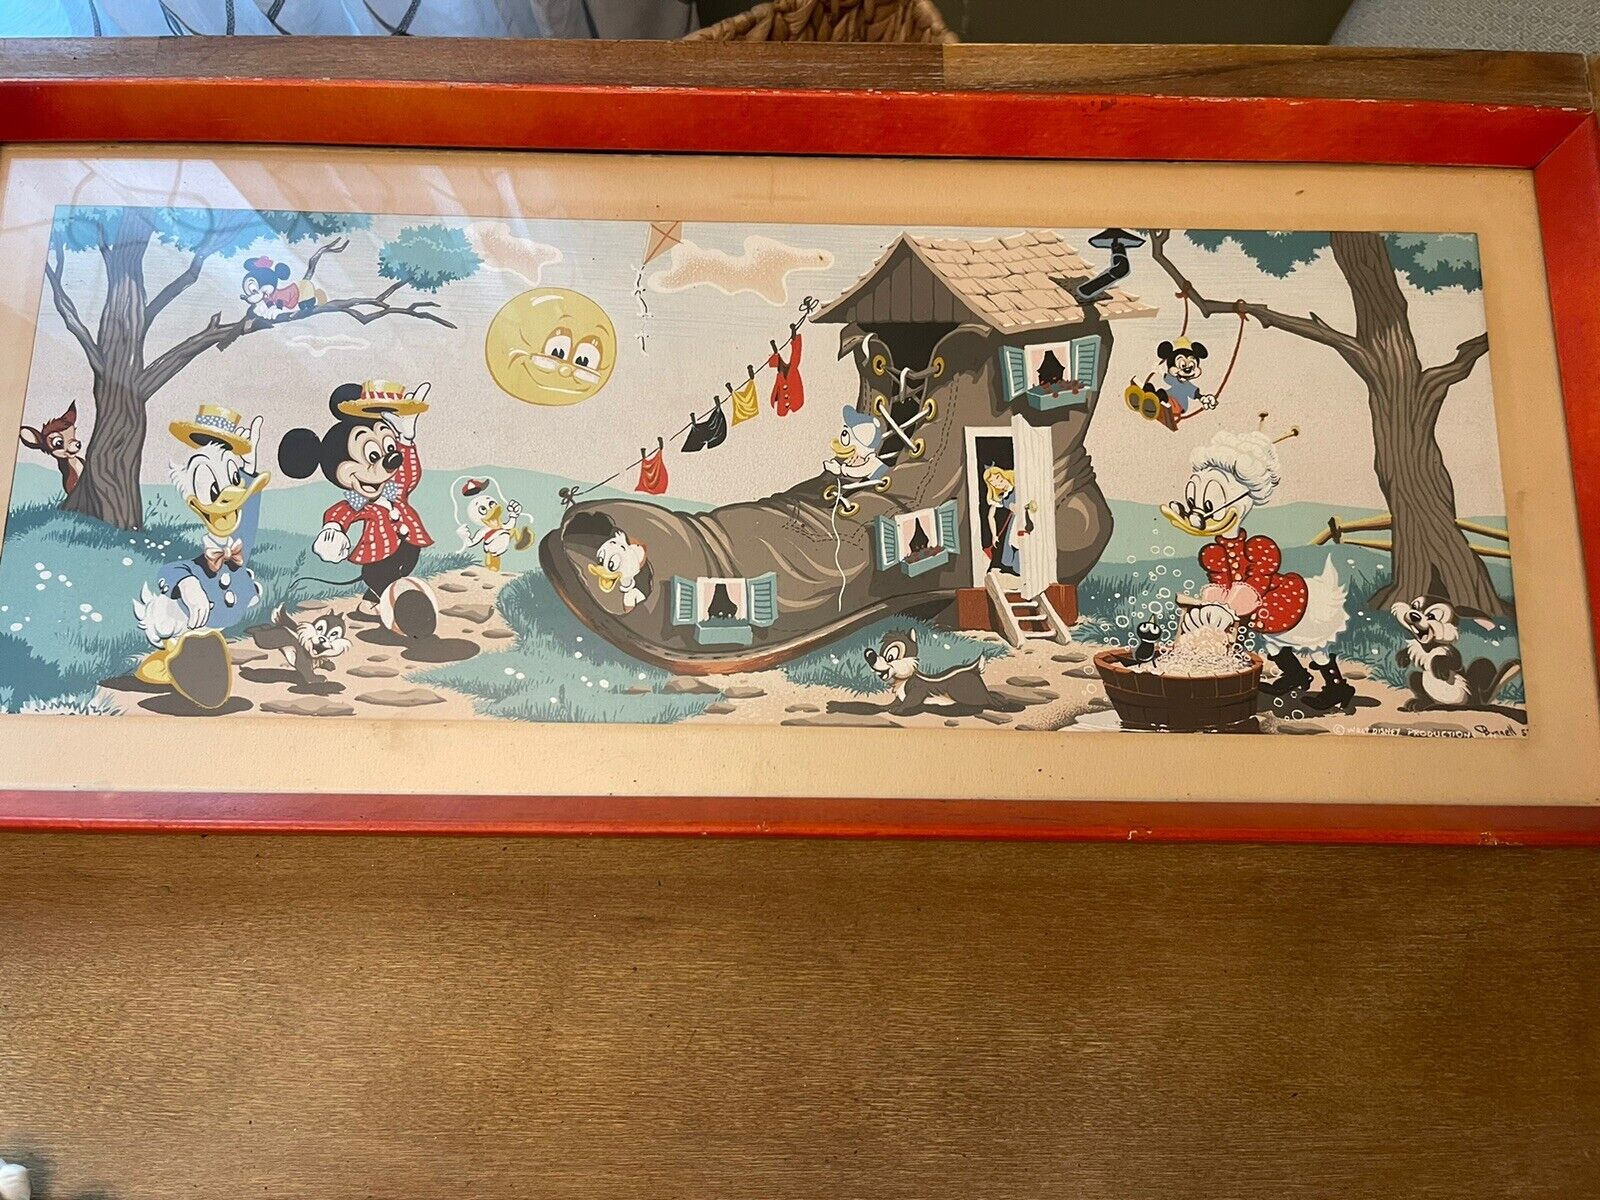 Vtg Water Color Framed Painting Disney Characters Mickey Donald Signed “Bennett”